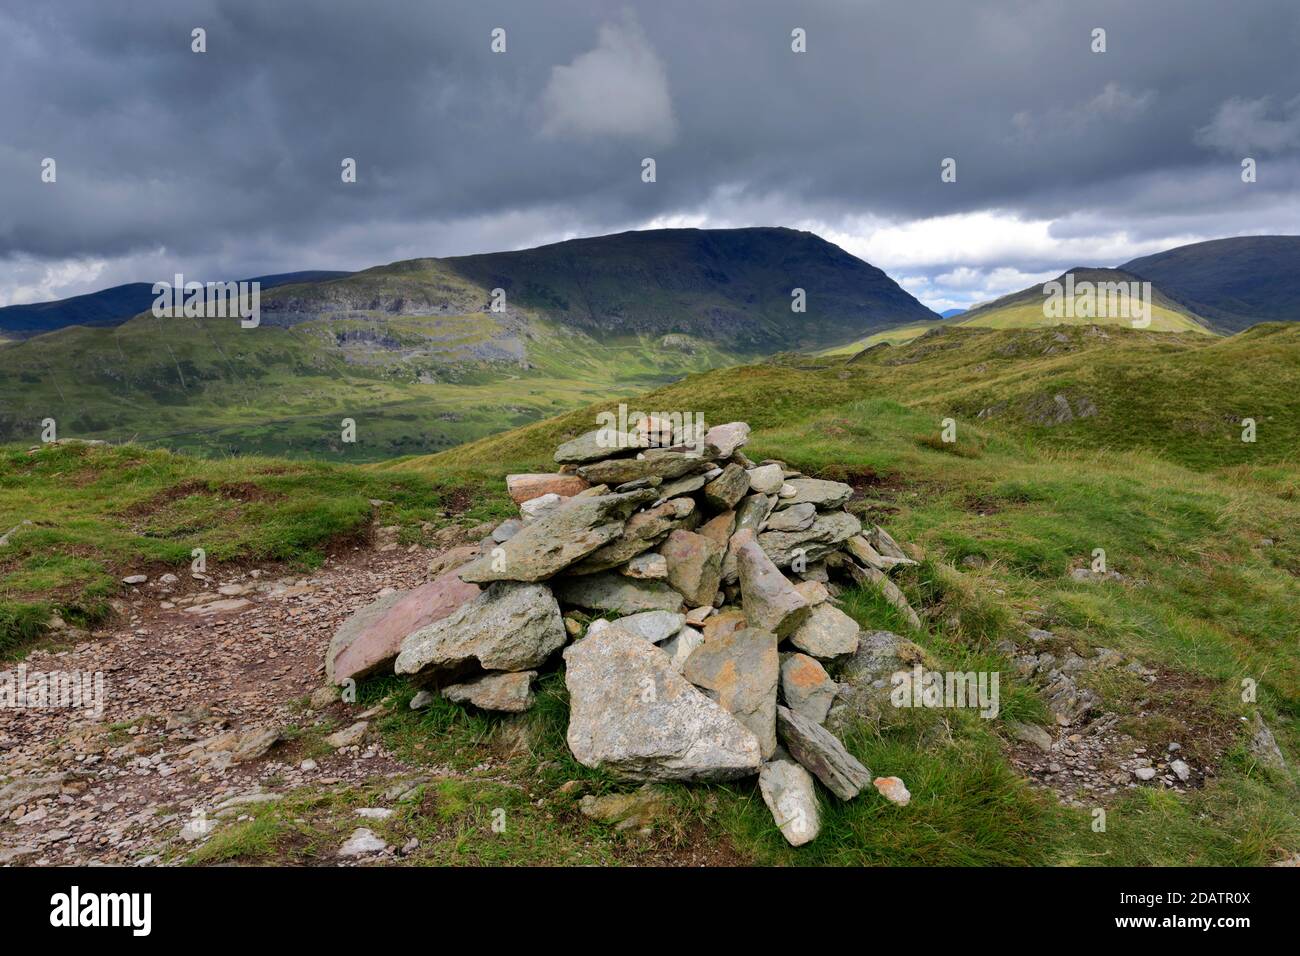 The Summit Cairn of Wansfell fell, Troutbeck village, Kirkstone pass, Lake District National Park, Cumbria, England, UK Wansfell fell is one of the 21 Stock Photo